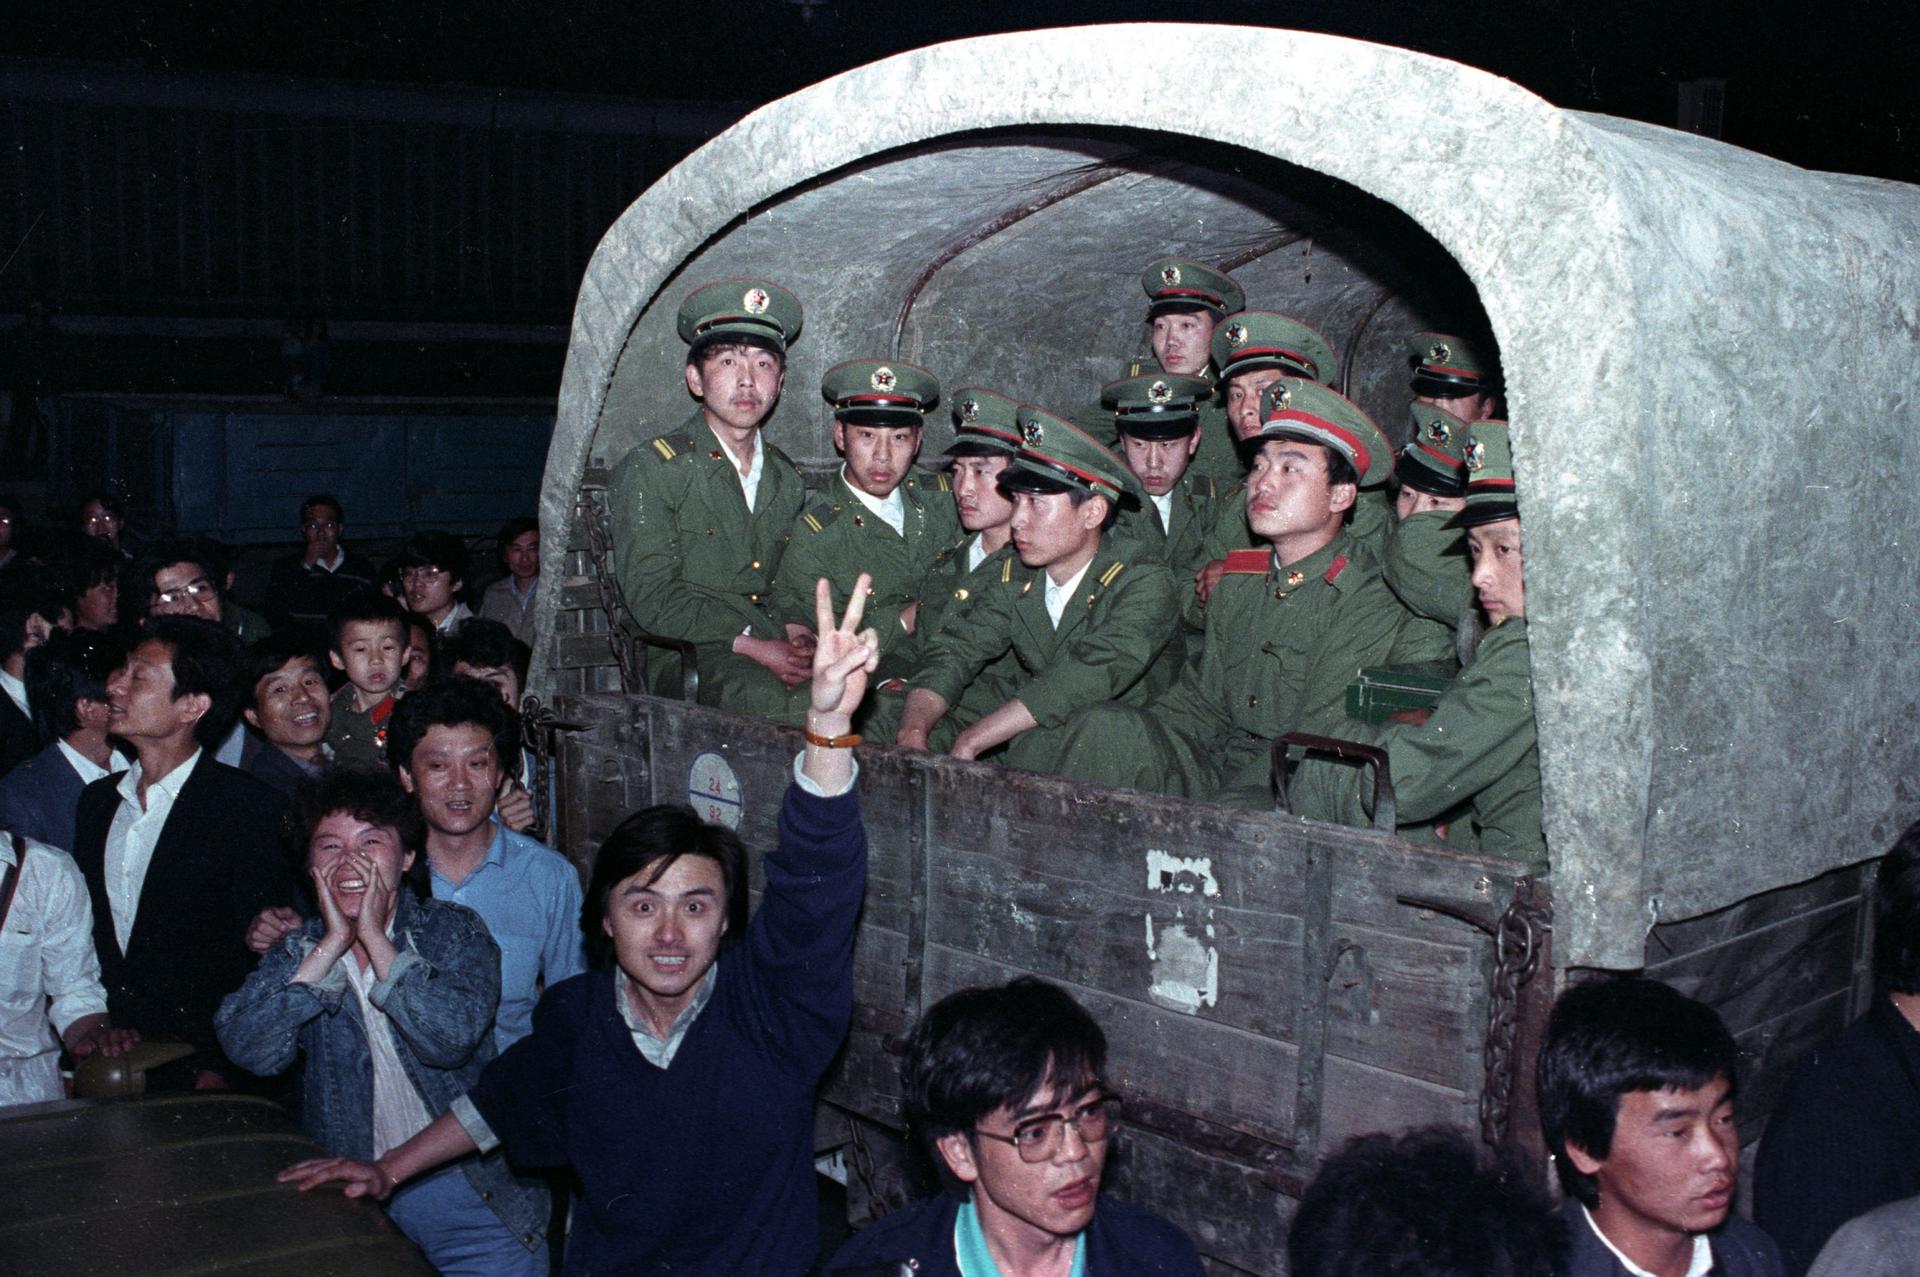 At night a group of students surround a military vehicle. 